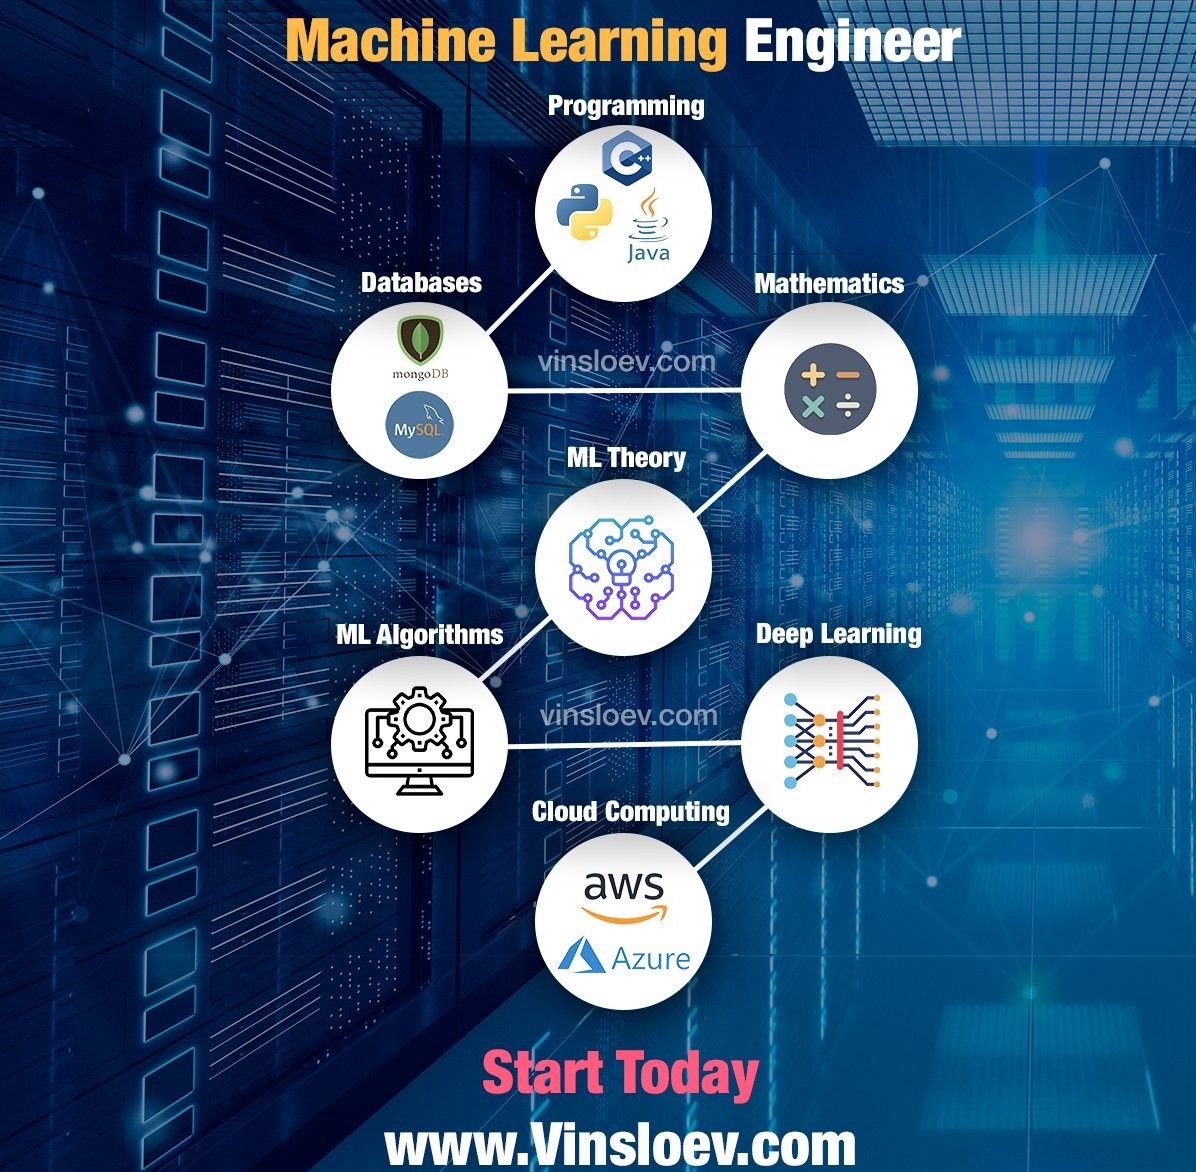 Become a Machine Learning Engineer - Start your journey with us at vinsloev.com #MachineLearning #DataScience #mathematics #deeplearning #algorithms #Python #coding #Google